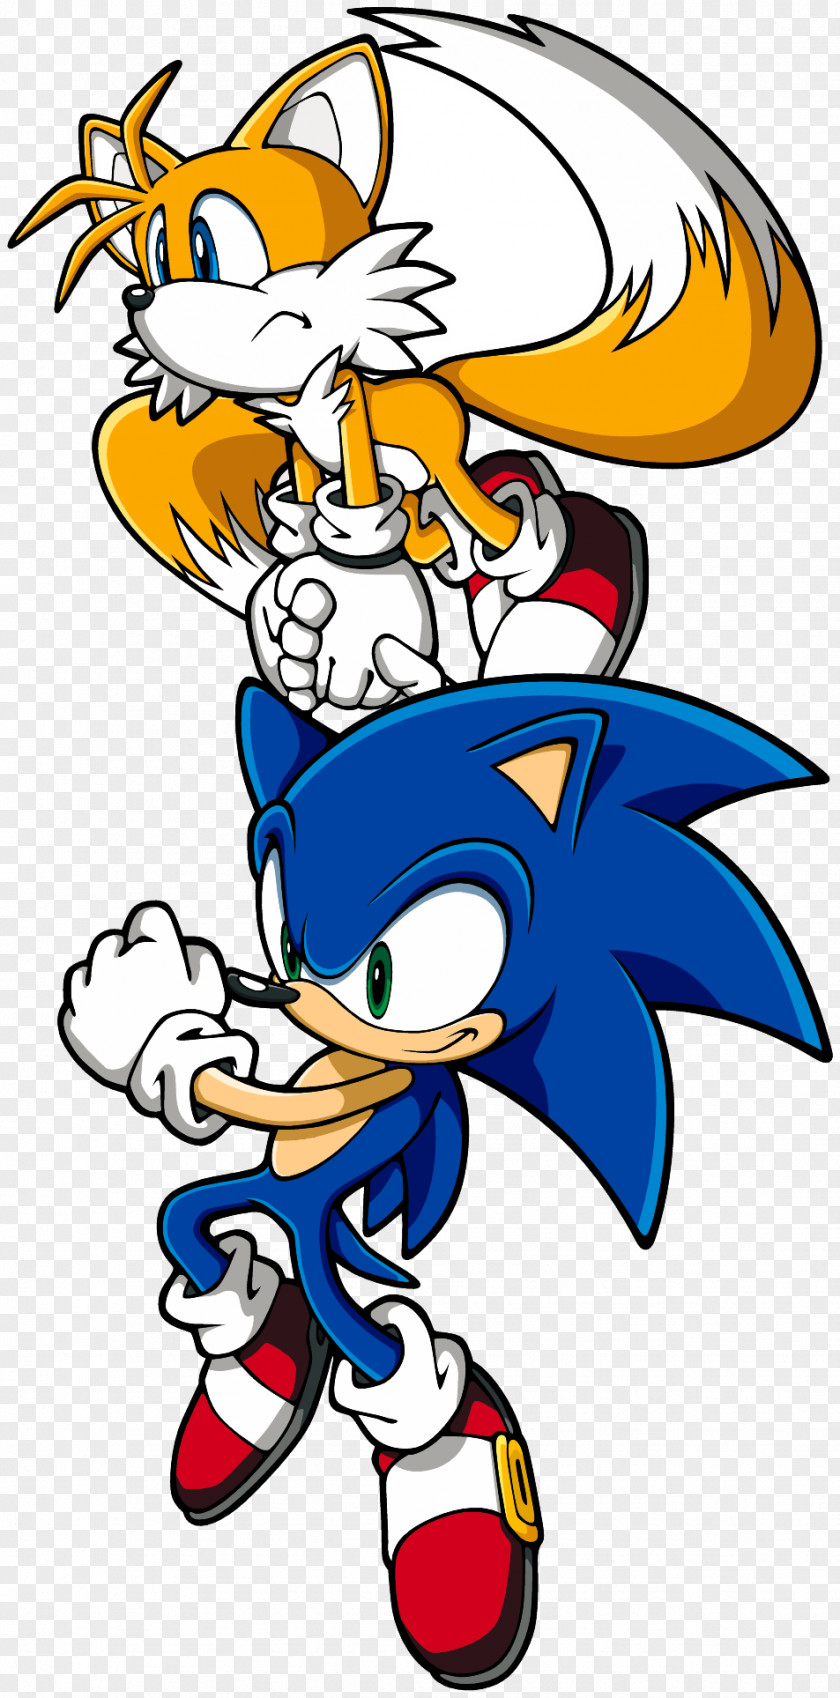 Magneto Sonic & Knuckles The Hedgehog 2 Tails Advance PNG